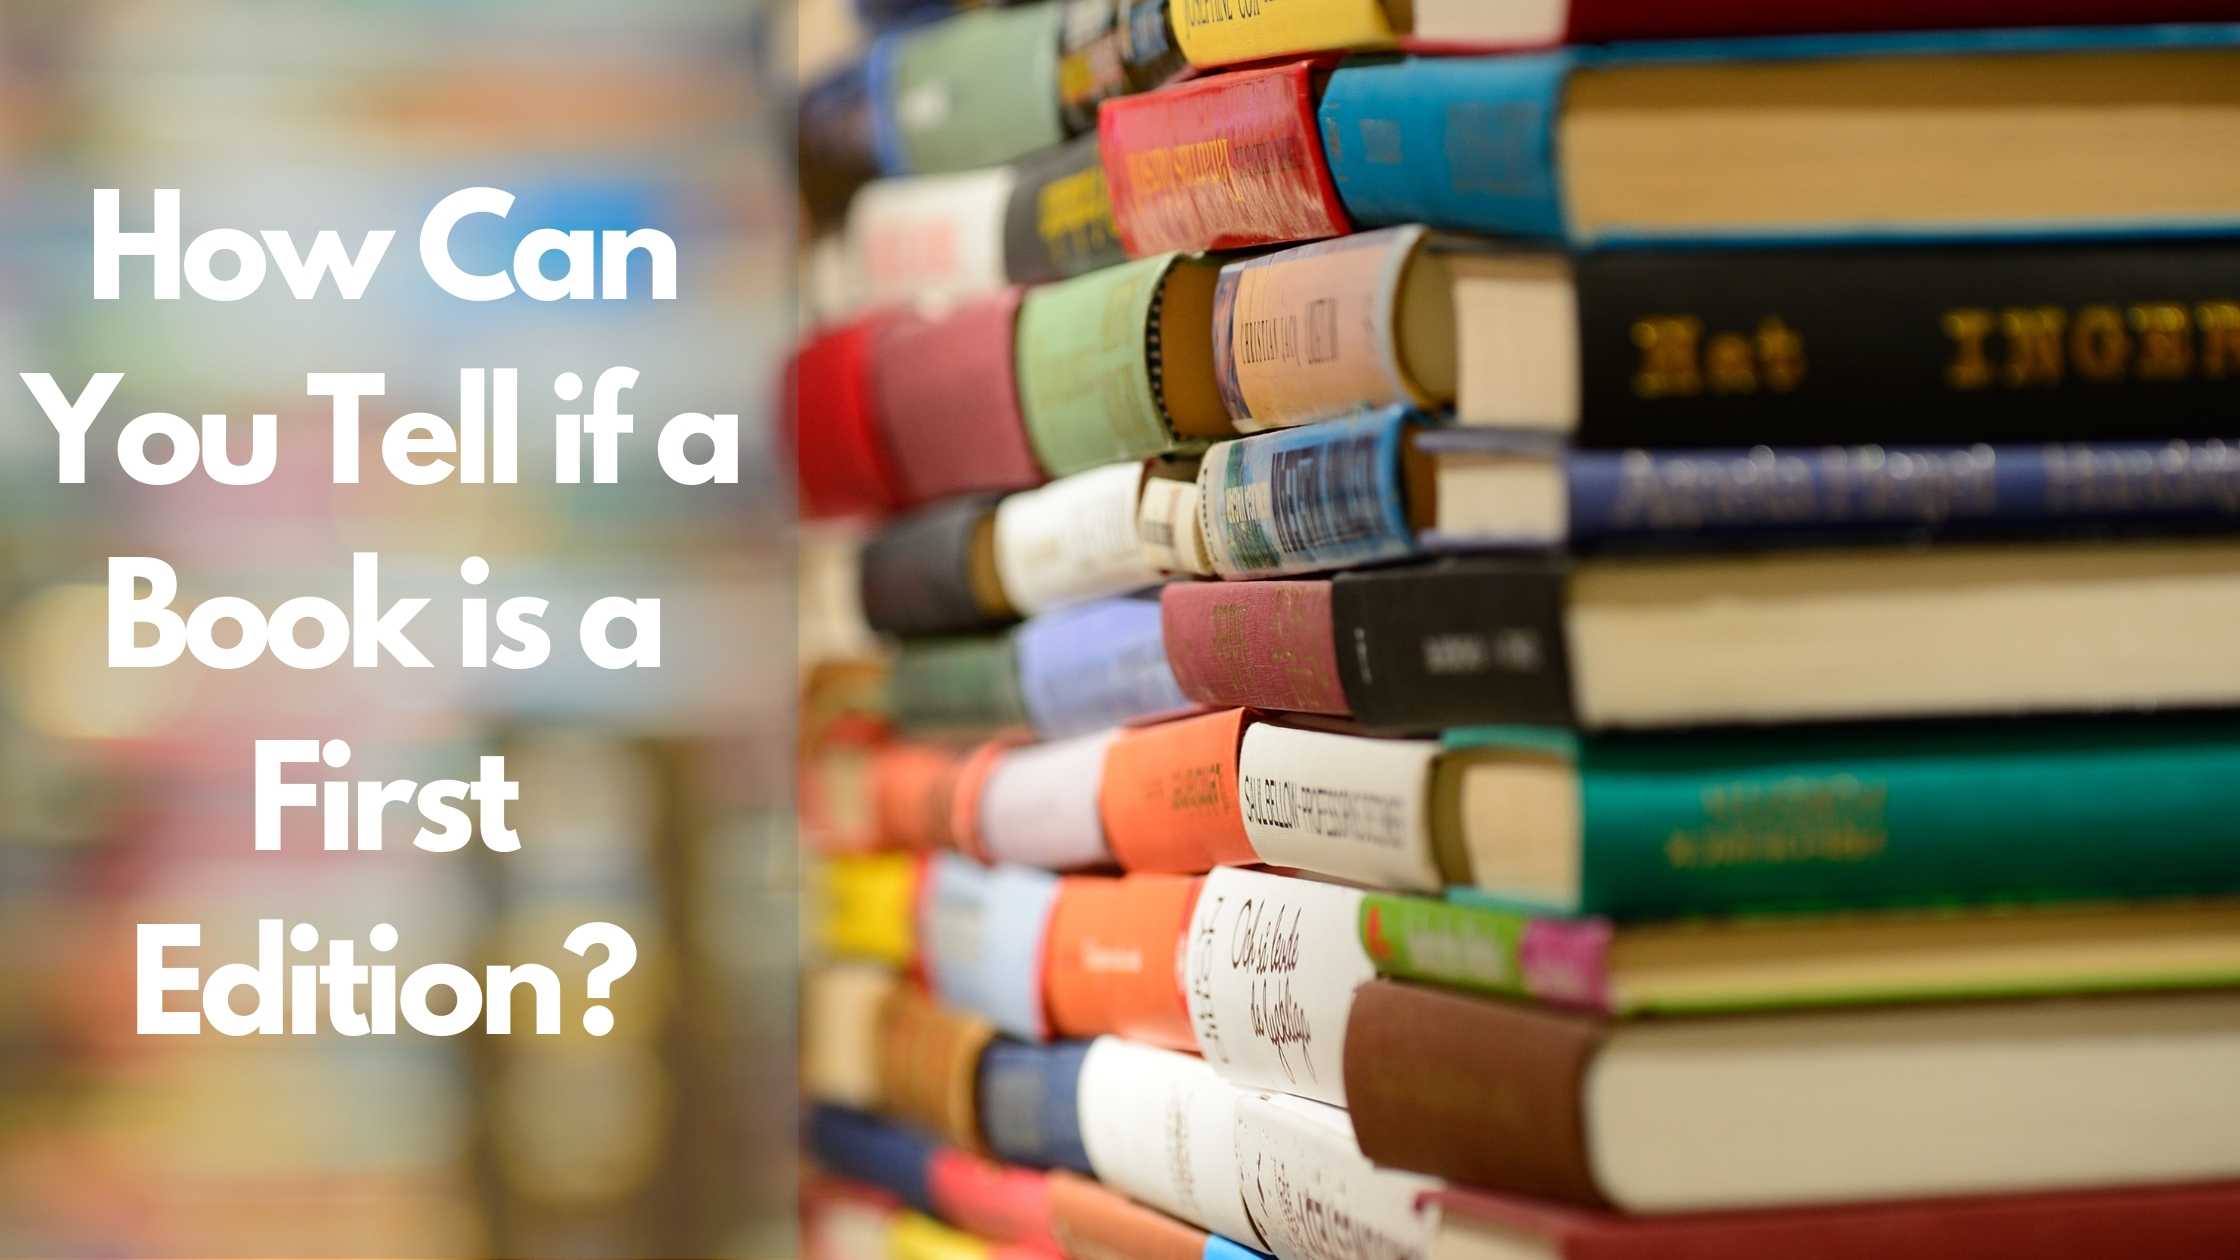 How Can You Tell if a Book is a First Edition?